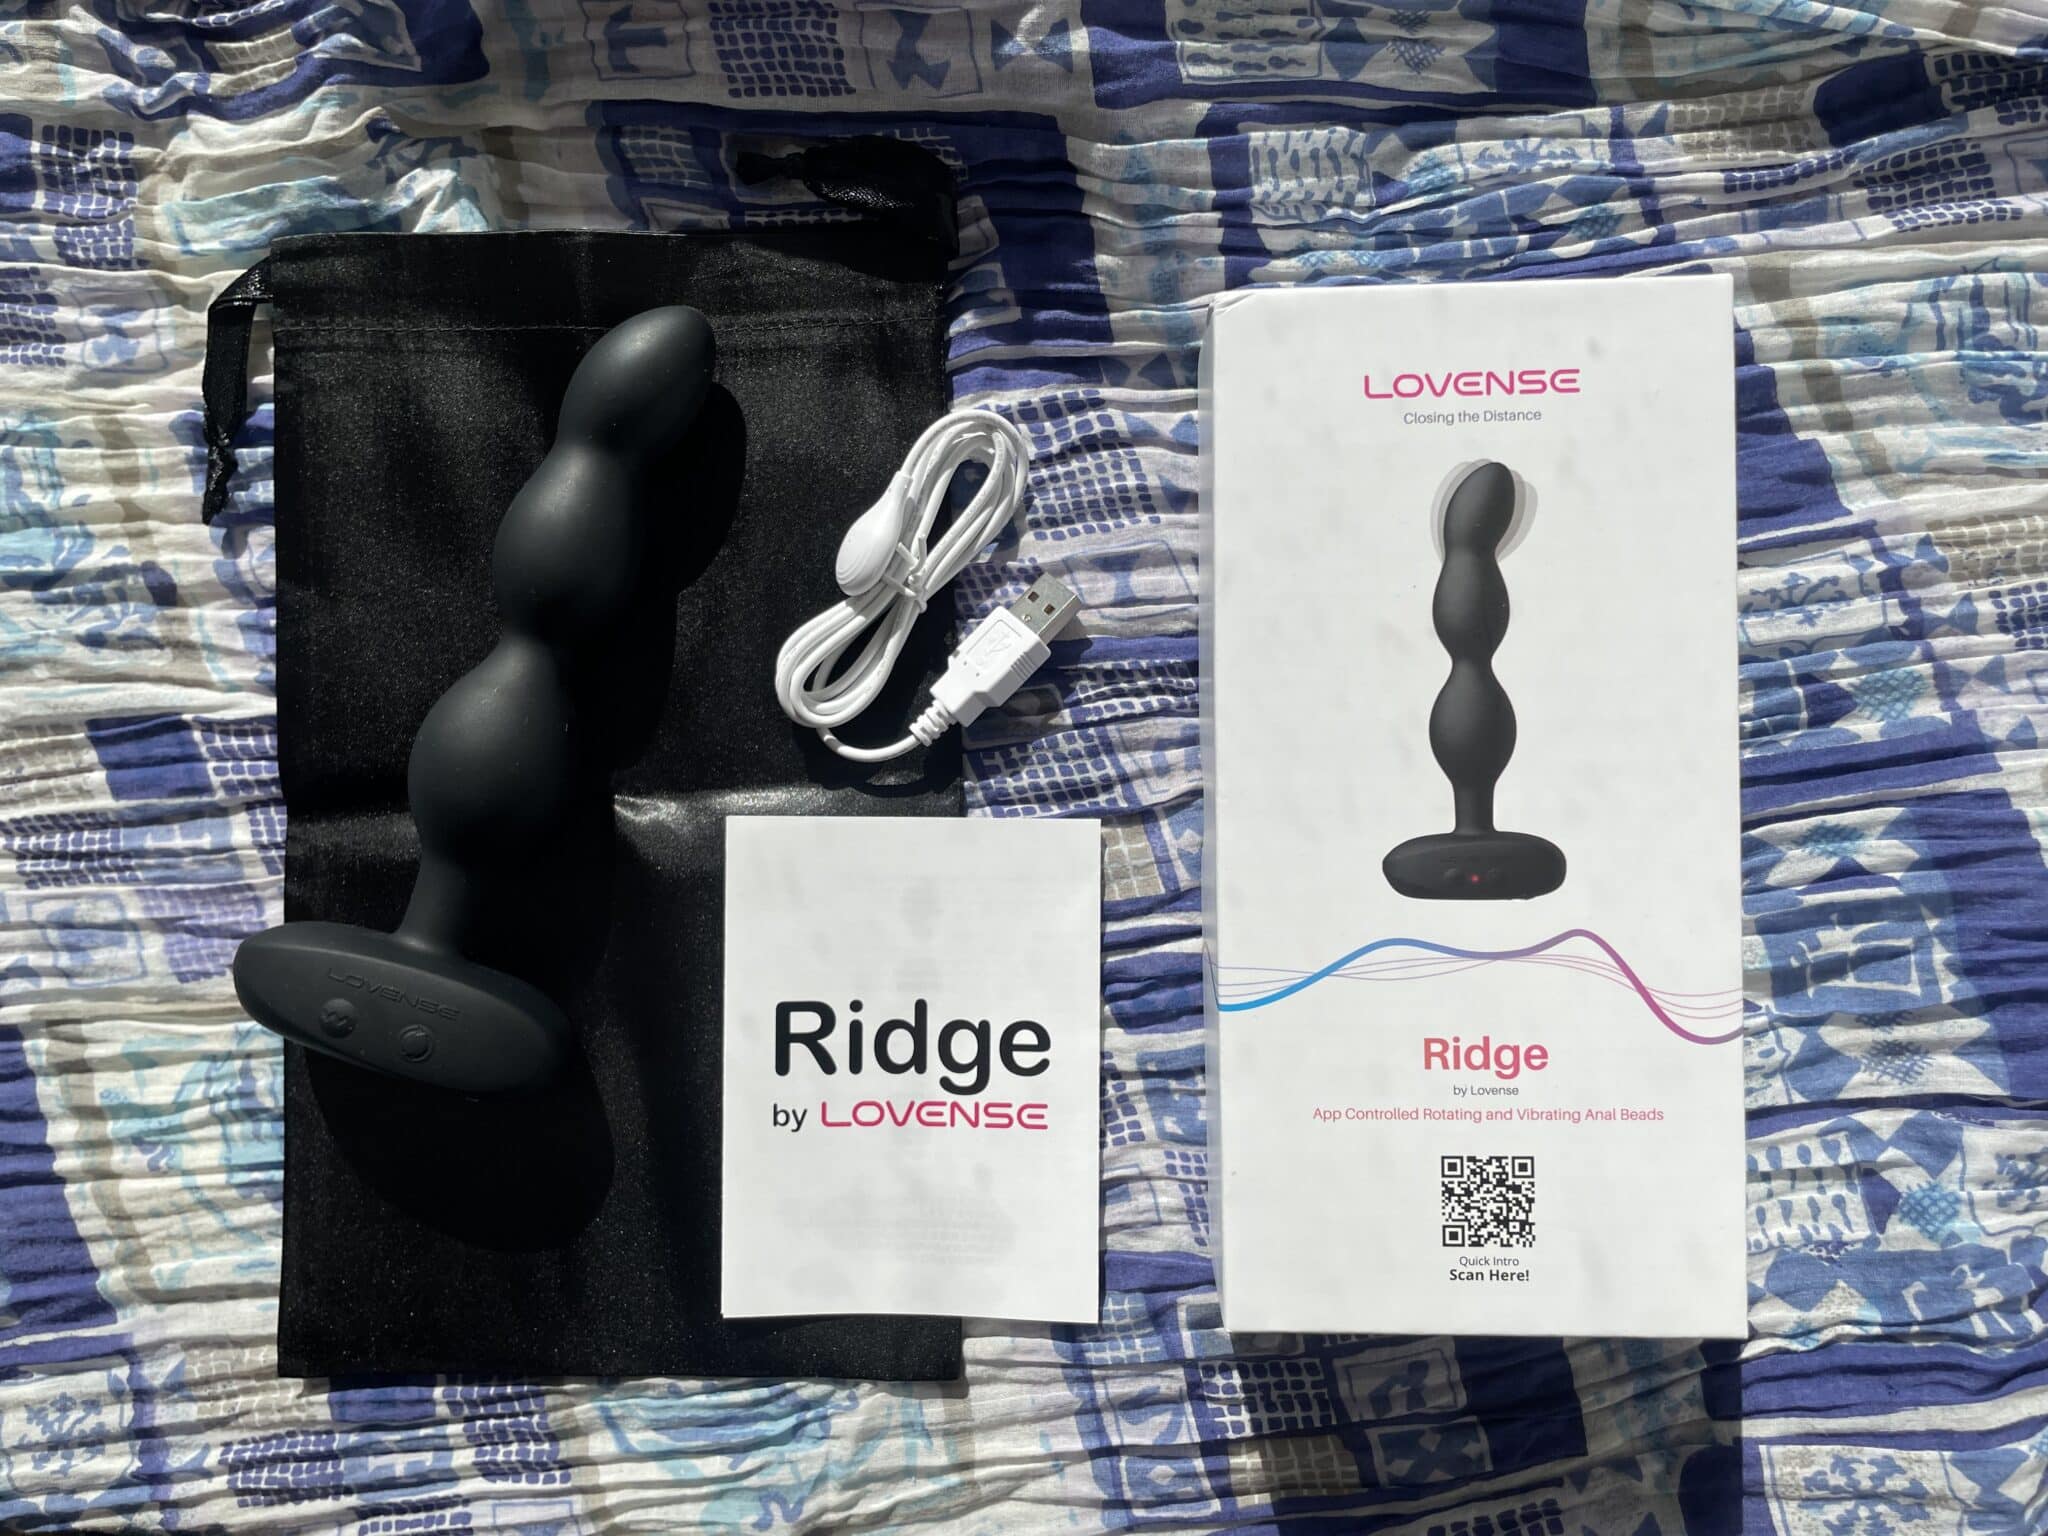 Lovense Ridge Analyzing the Packaging: First Impressions